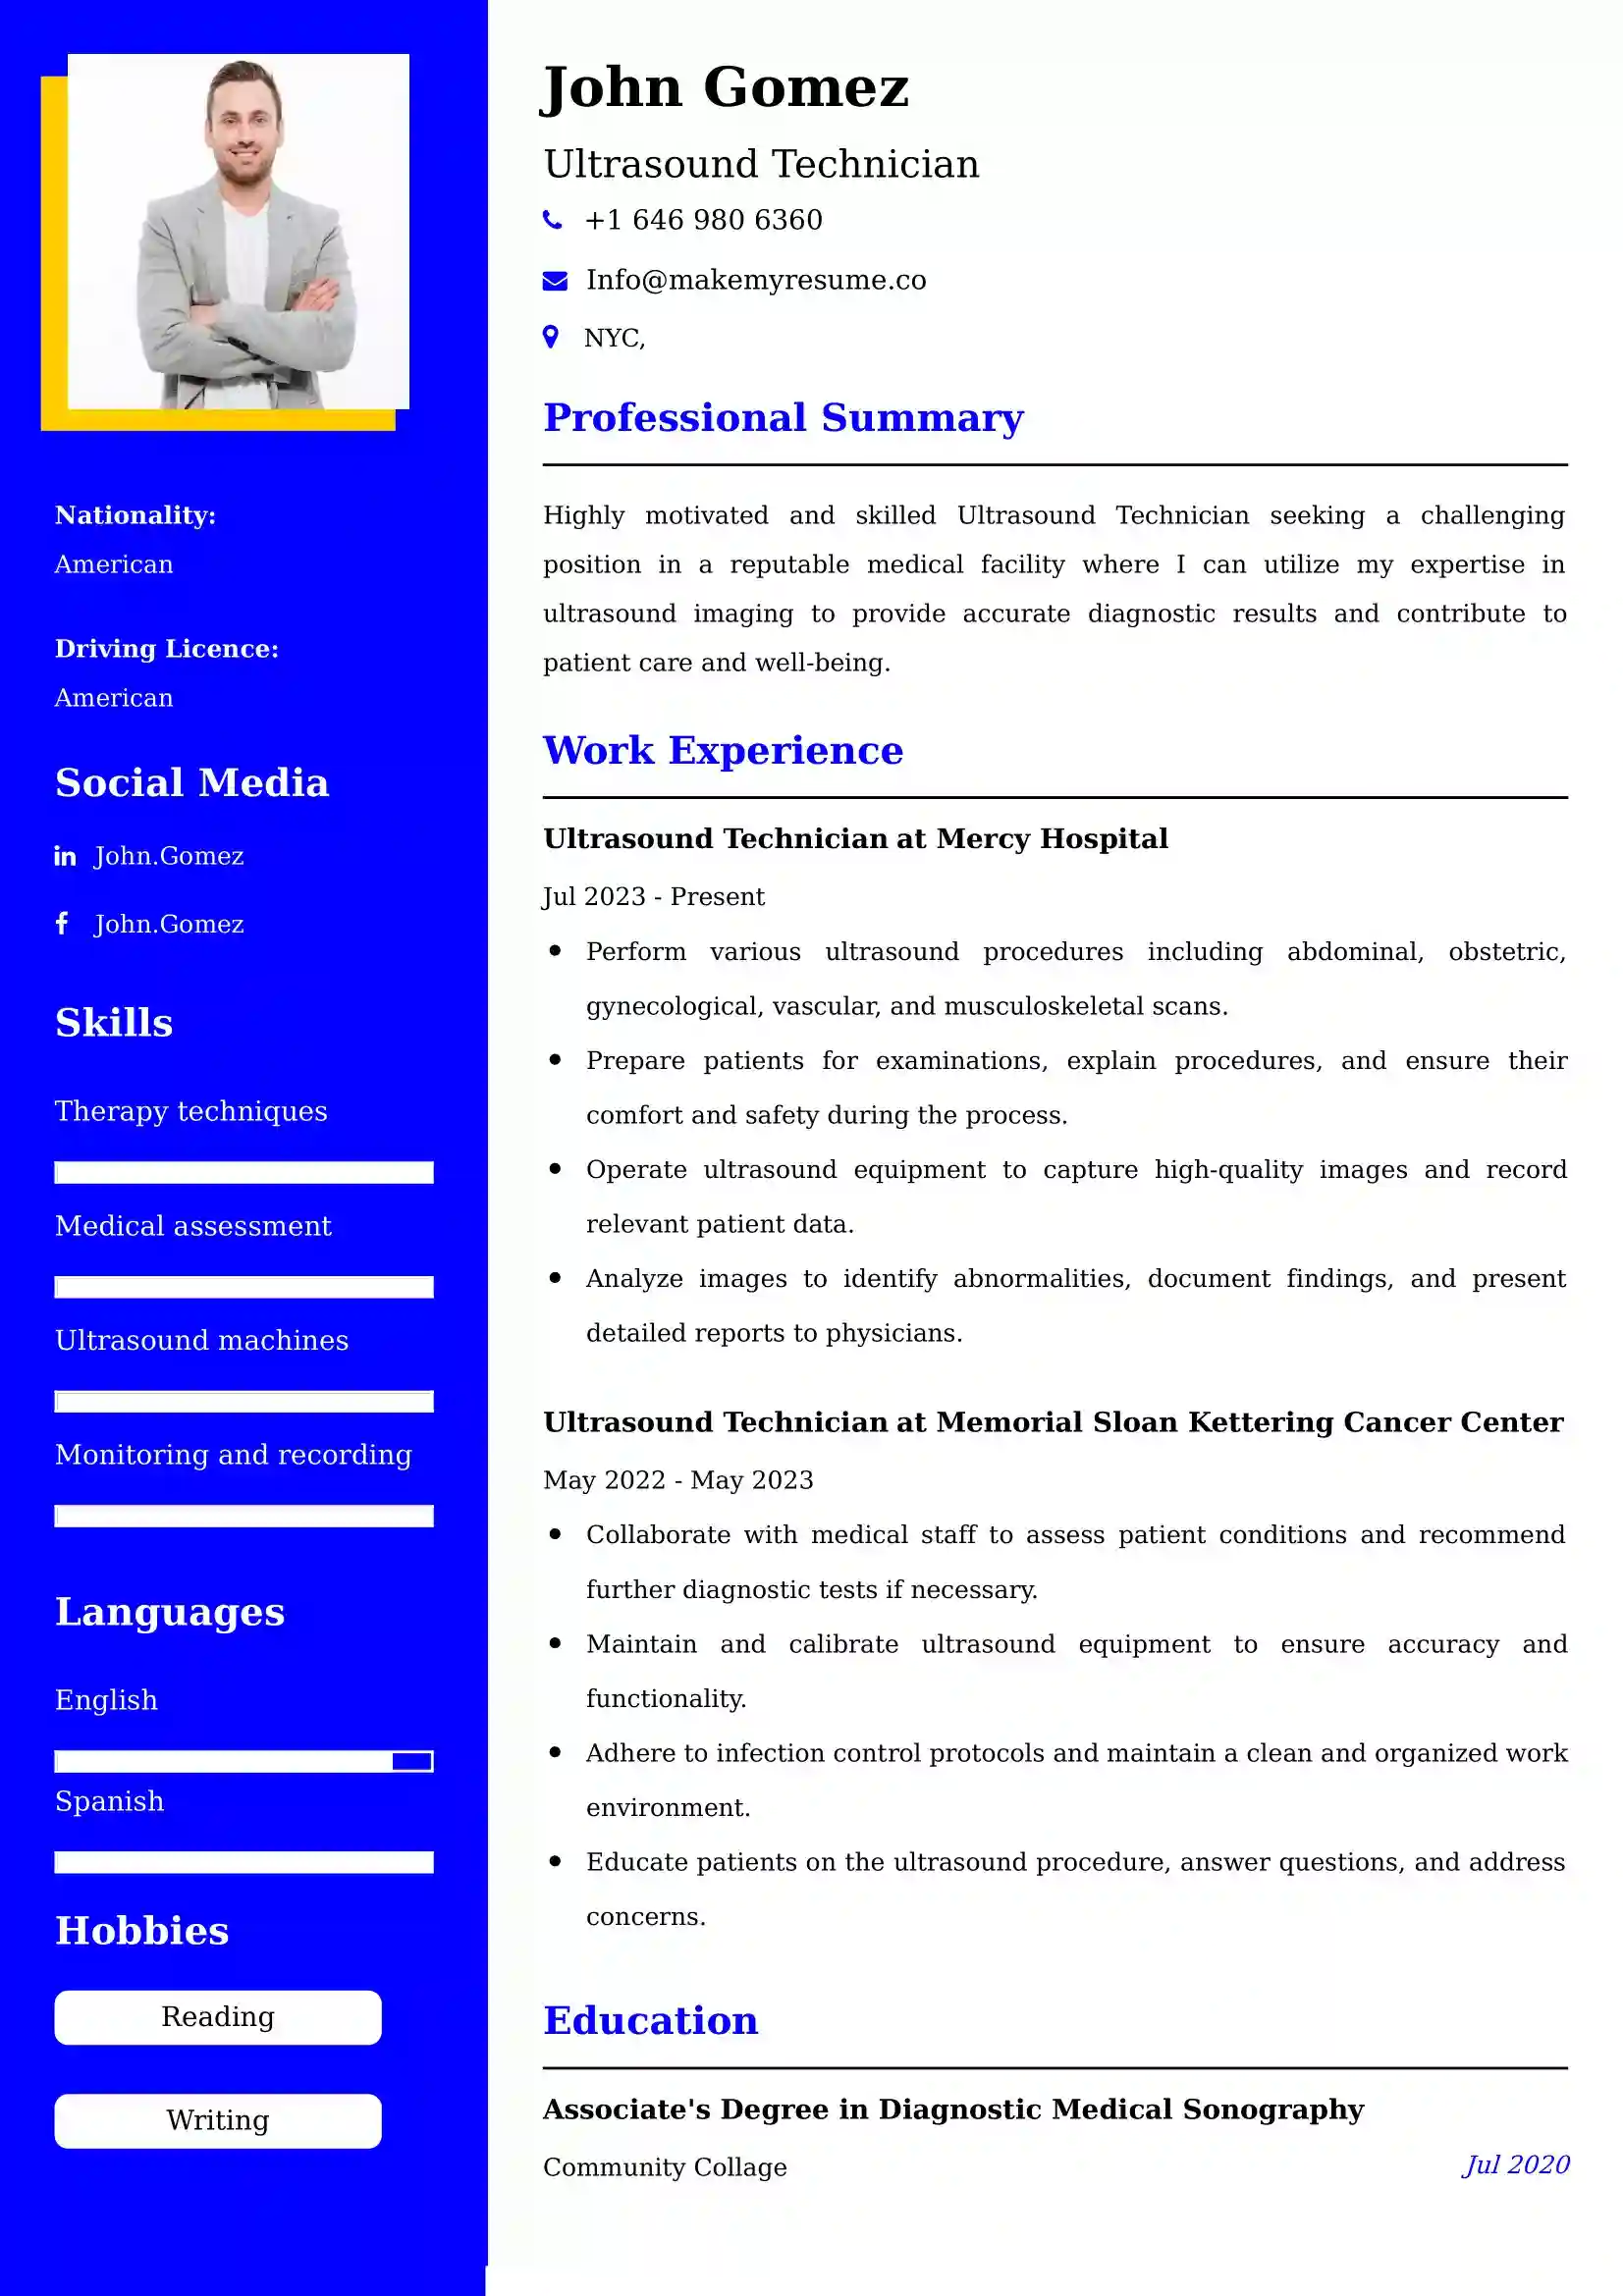 Ultrasound Technician Resume Examples - UAE Format and Tips.